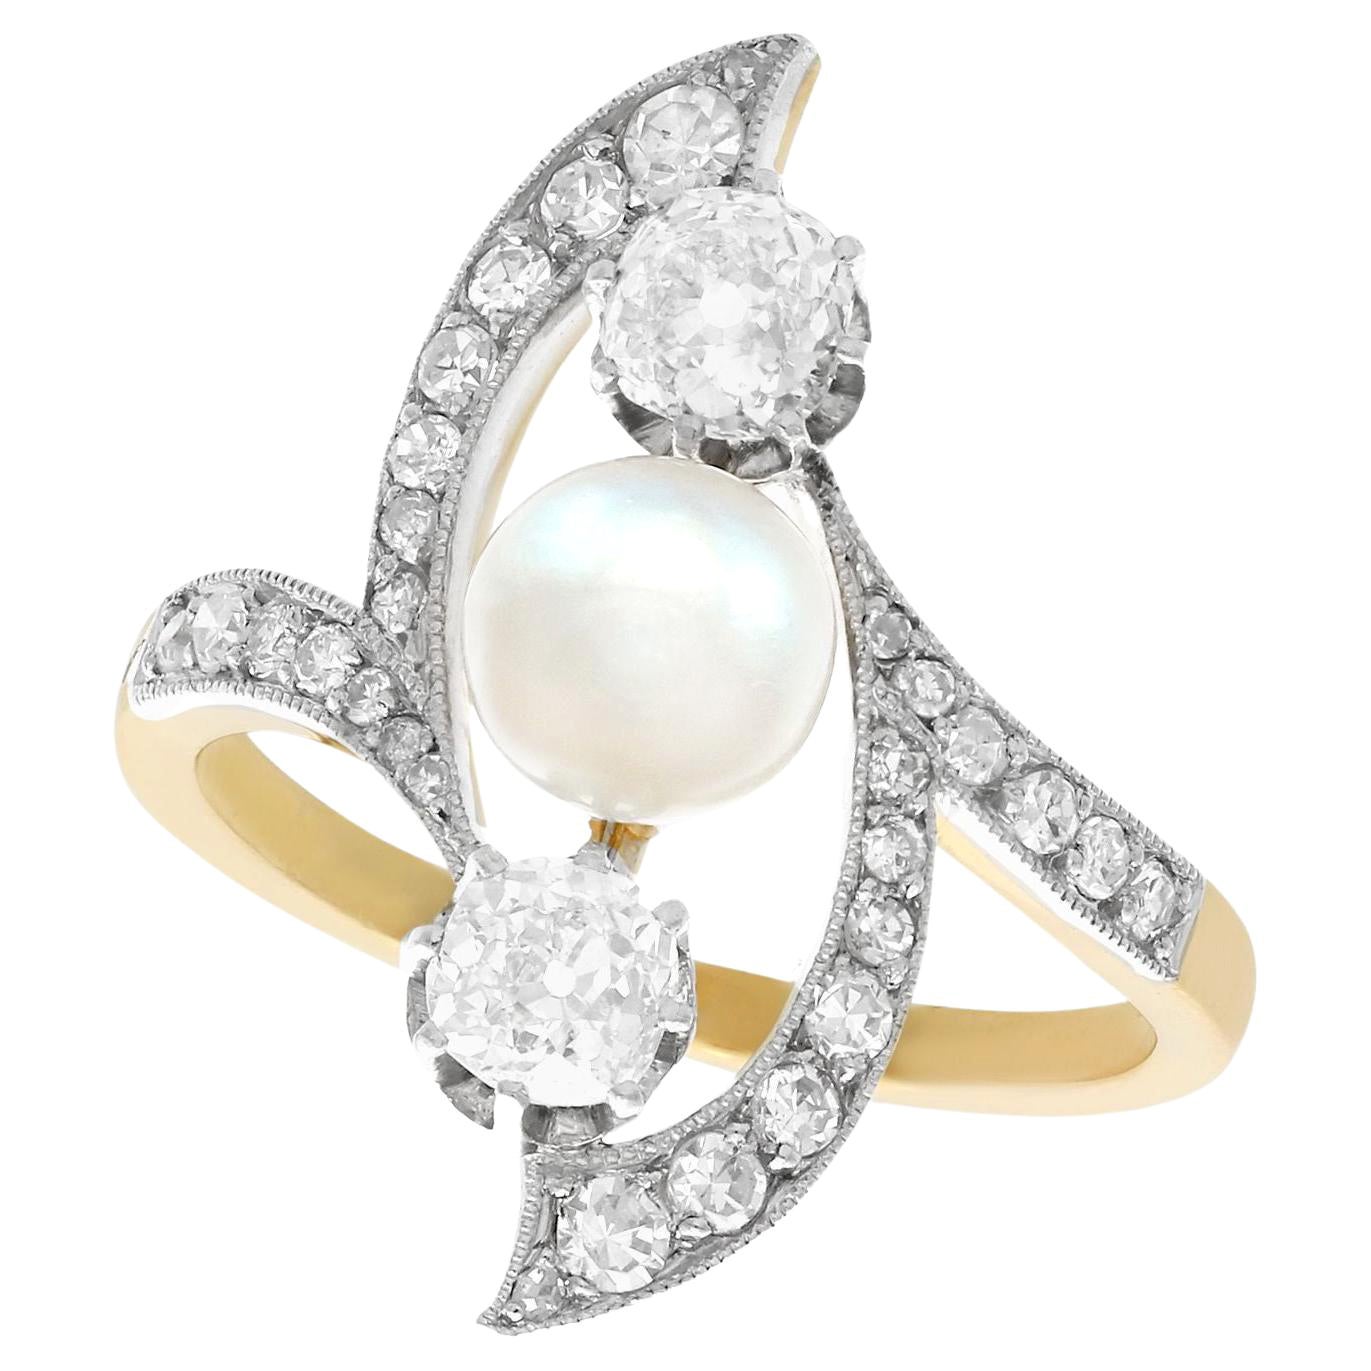 French Art Nouveau Pearl 1.14 Carat Diamond Gold and Platinum Cocktail Ring